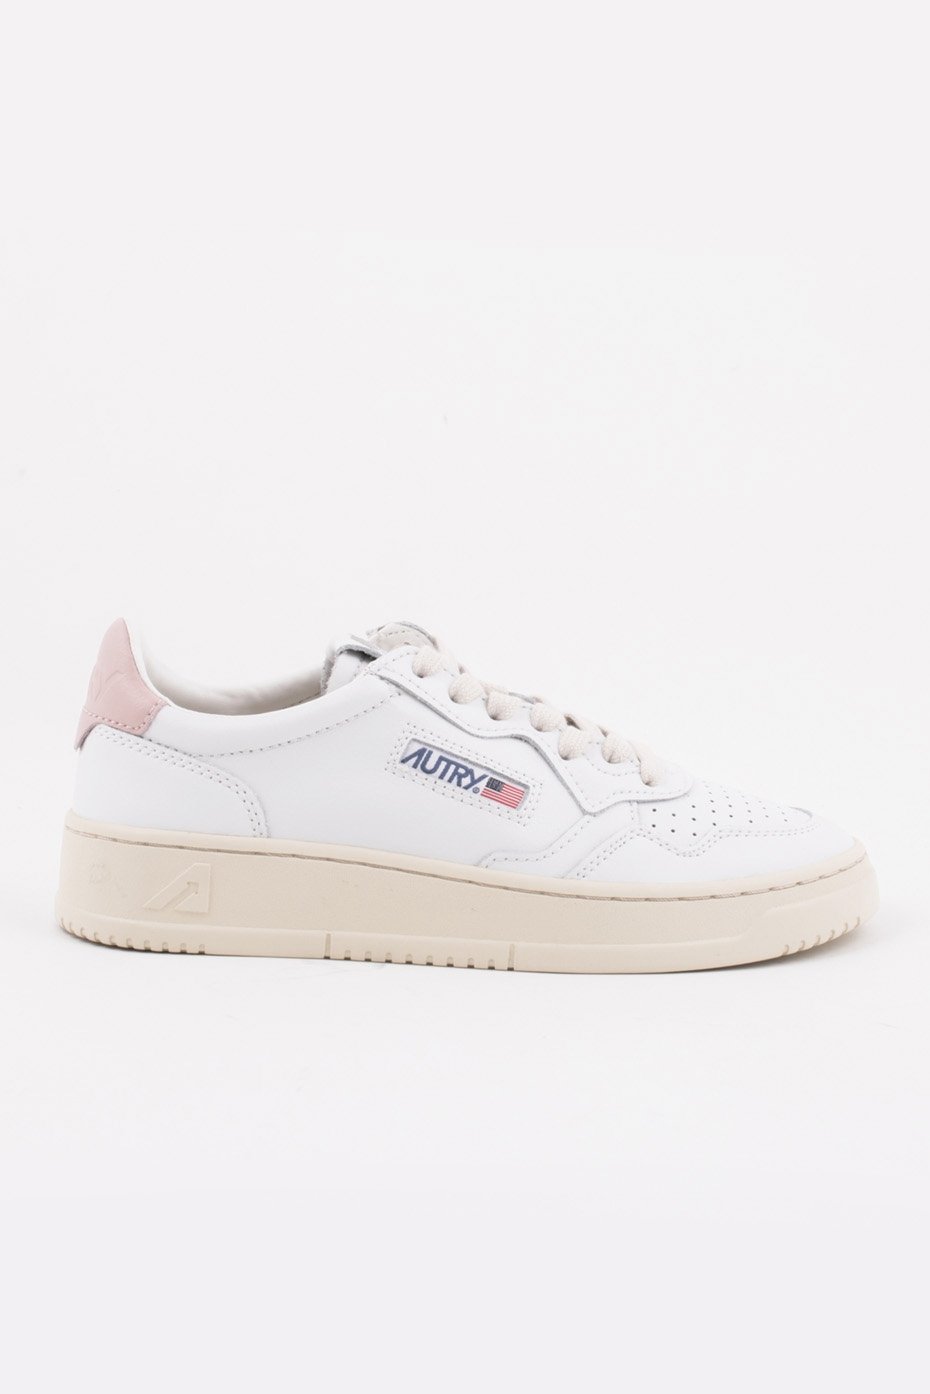 Autry AUTRY MEDALIST 01 LOW WHITE PINK LEATHER SNEAKERS WOMENS